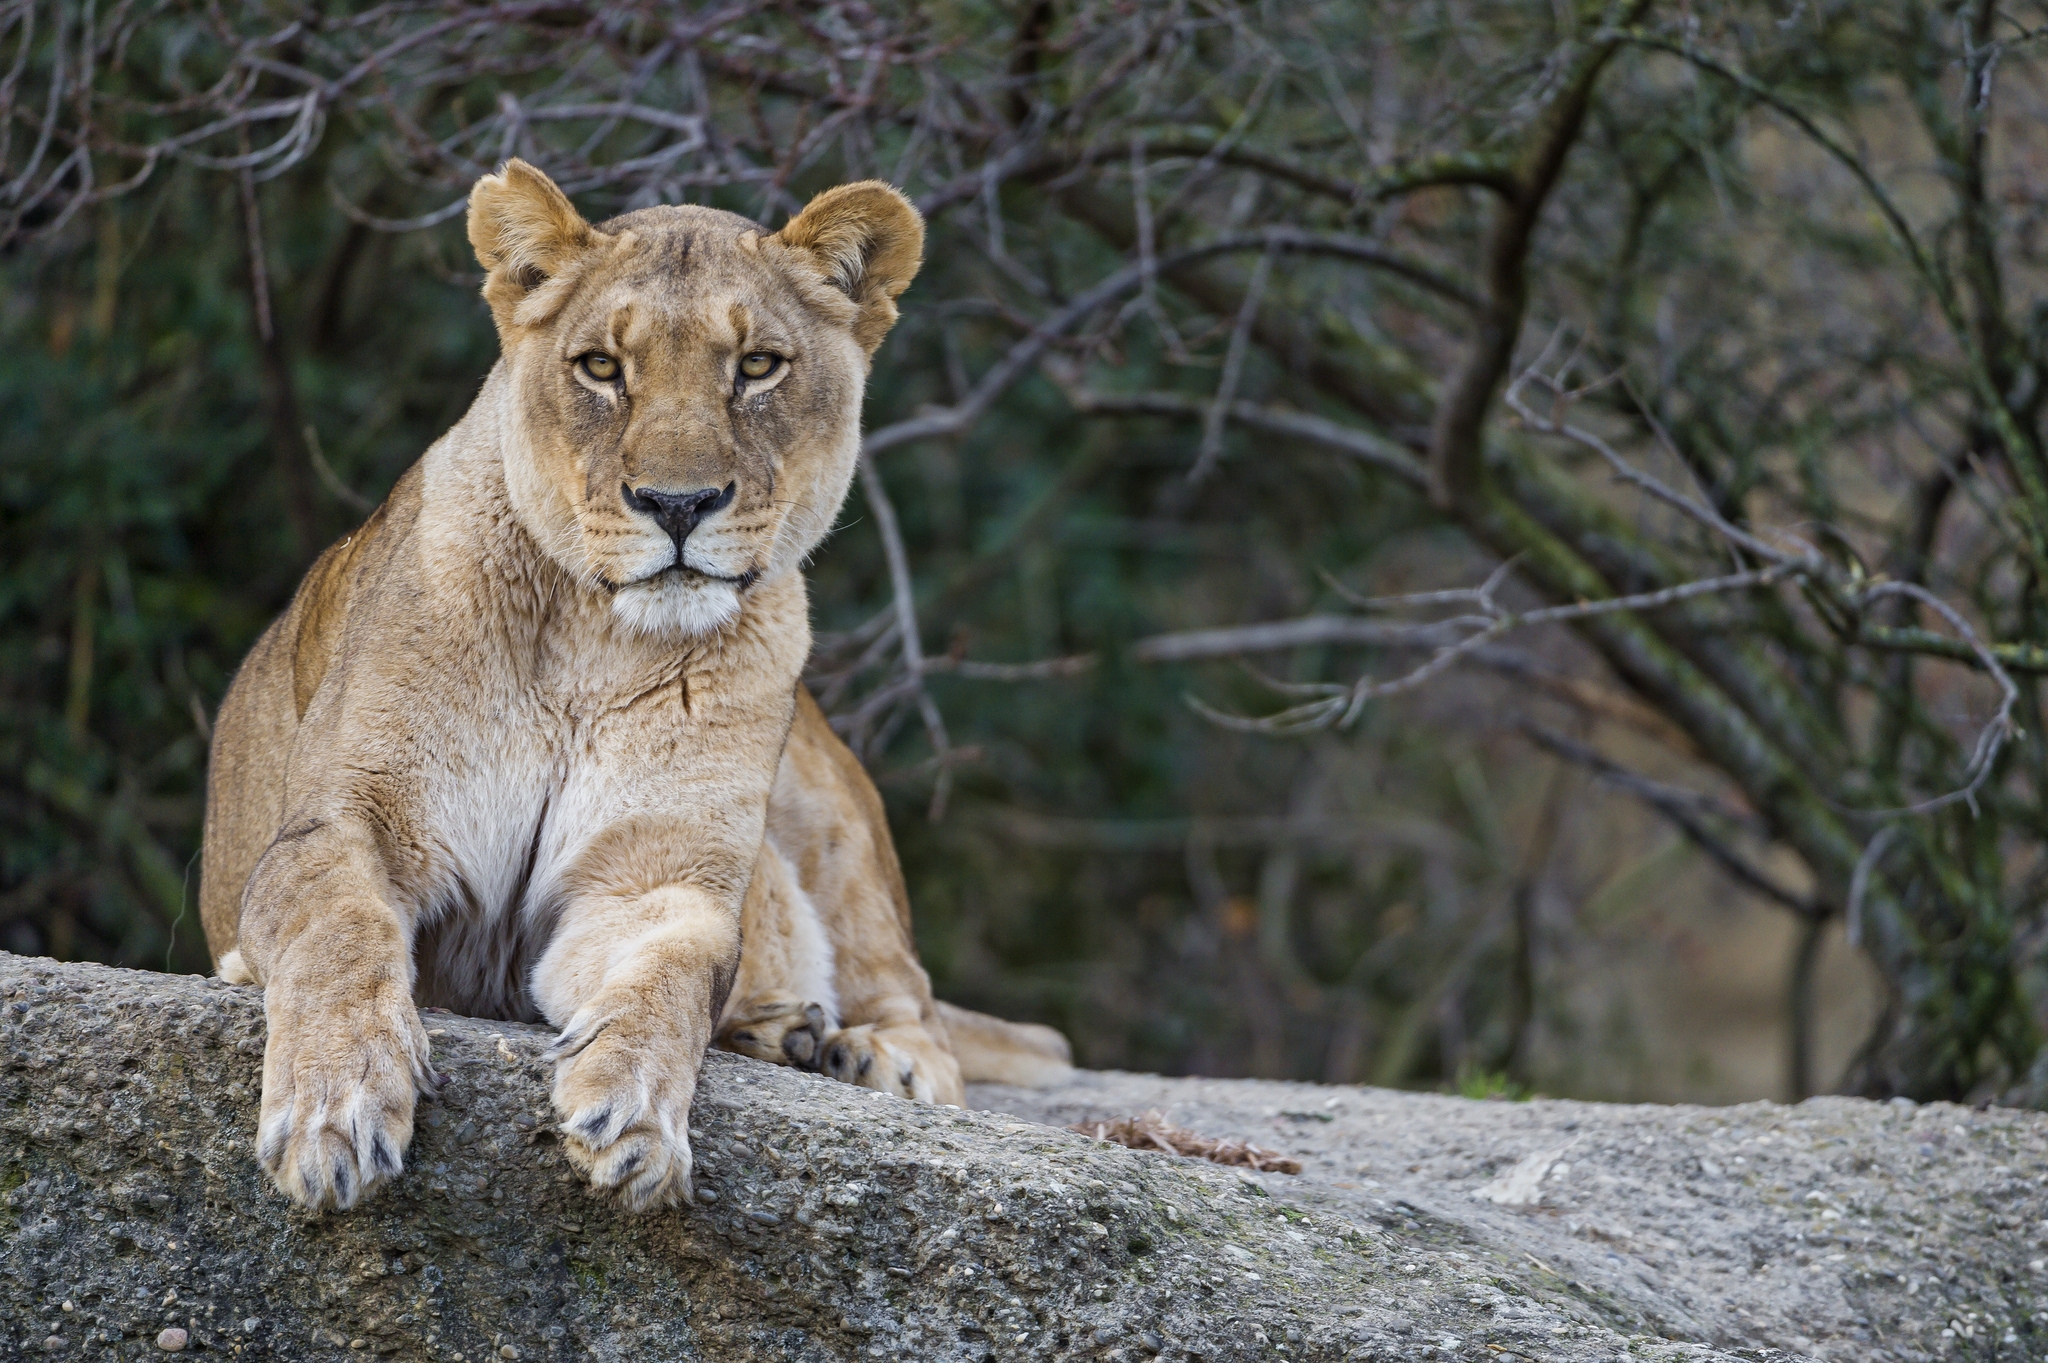 A lioness rests on a rock and looks up at the photographer